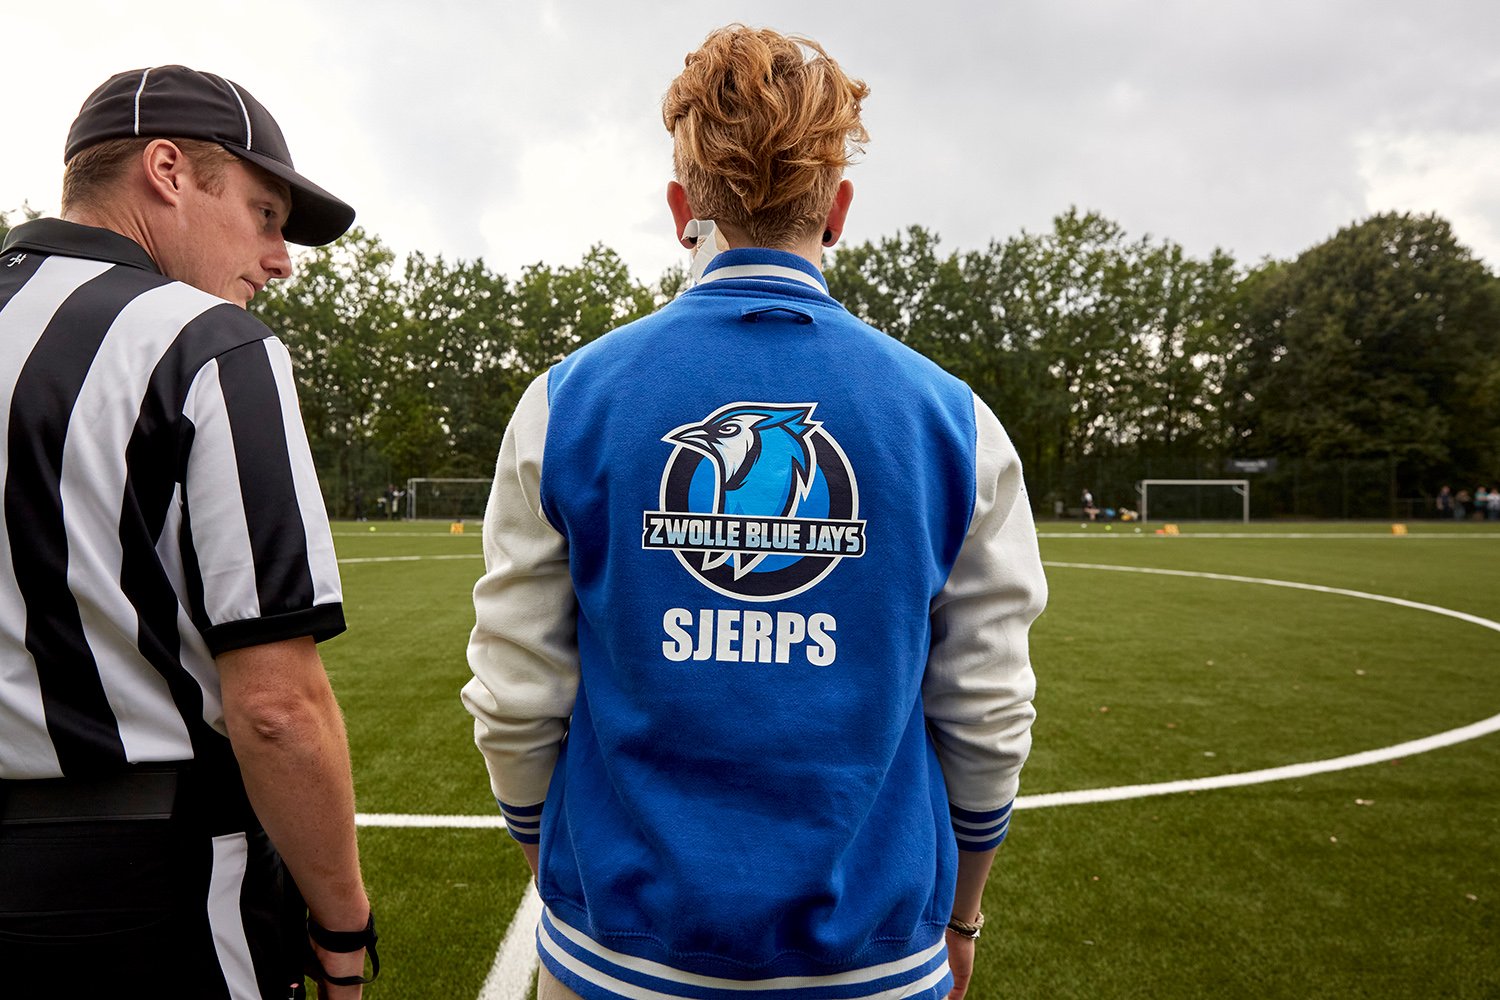  Wearing her team jacket with her last name on the back, Dominique talks to a referee during the first game of 2021 between Zwolle Blue Jays and Utrecht Wolverines, Utrecht, NL, 2021. 